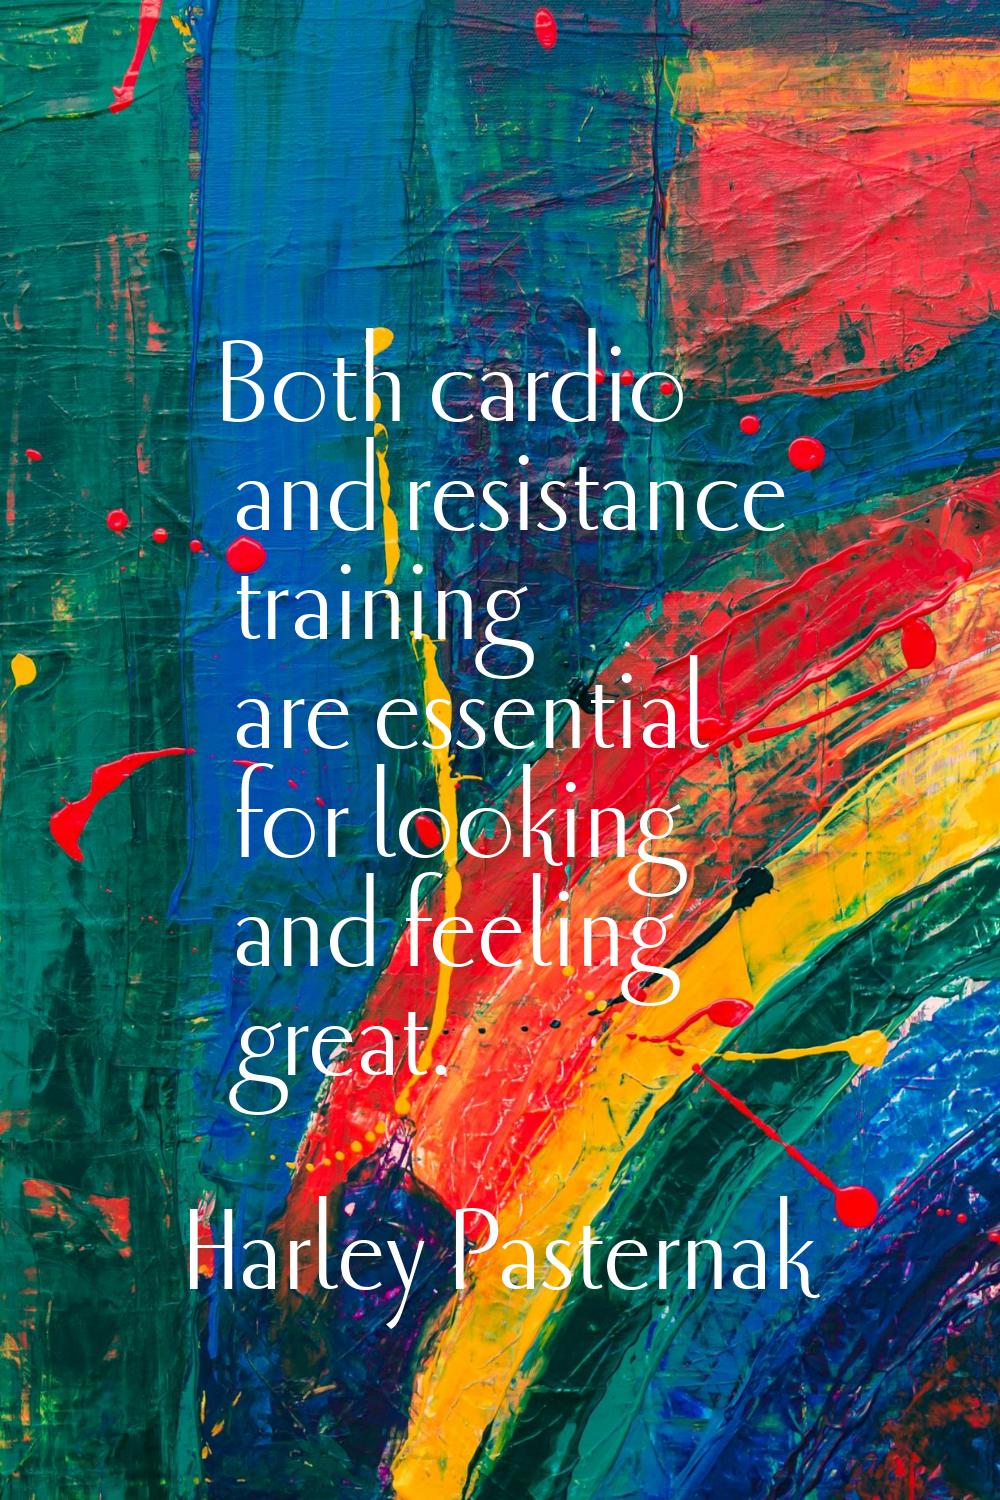 Both cardio and resistance training are essential for looking and feeling great.